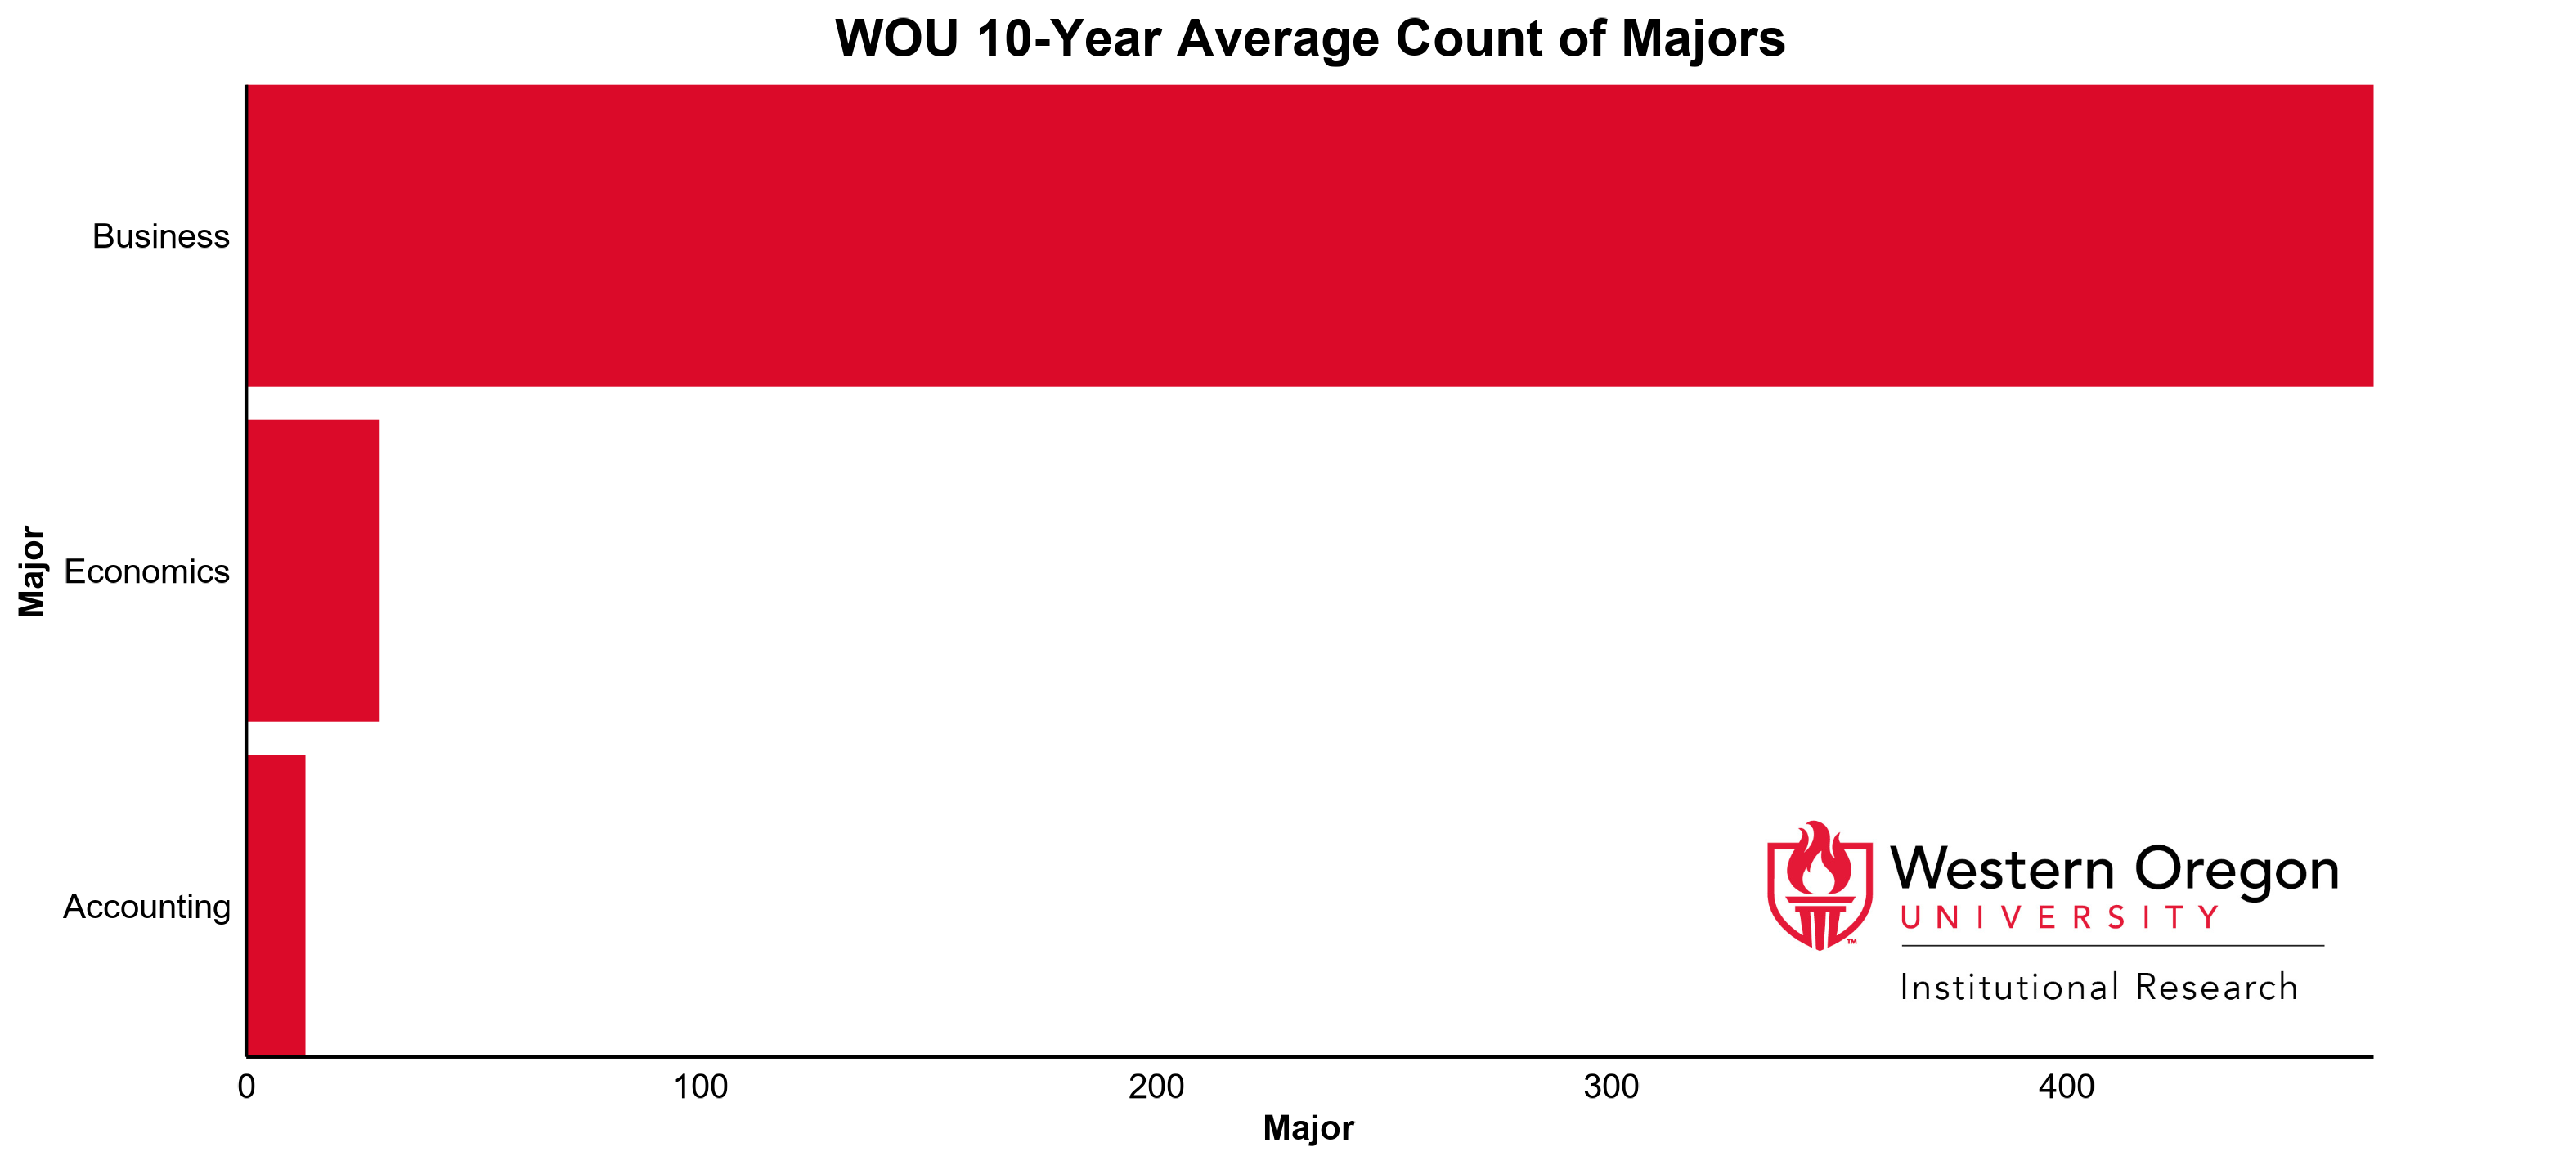 Bar graph of the 10-year average count of majors at WOU for the Business and Economics division